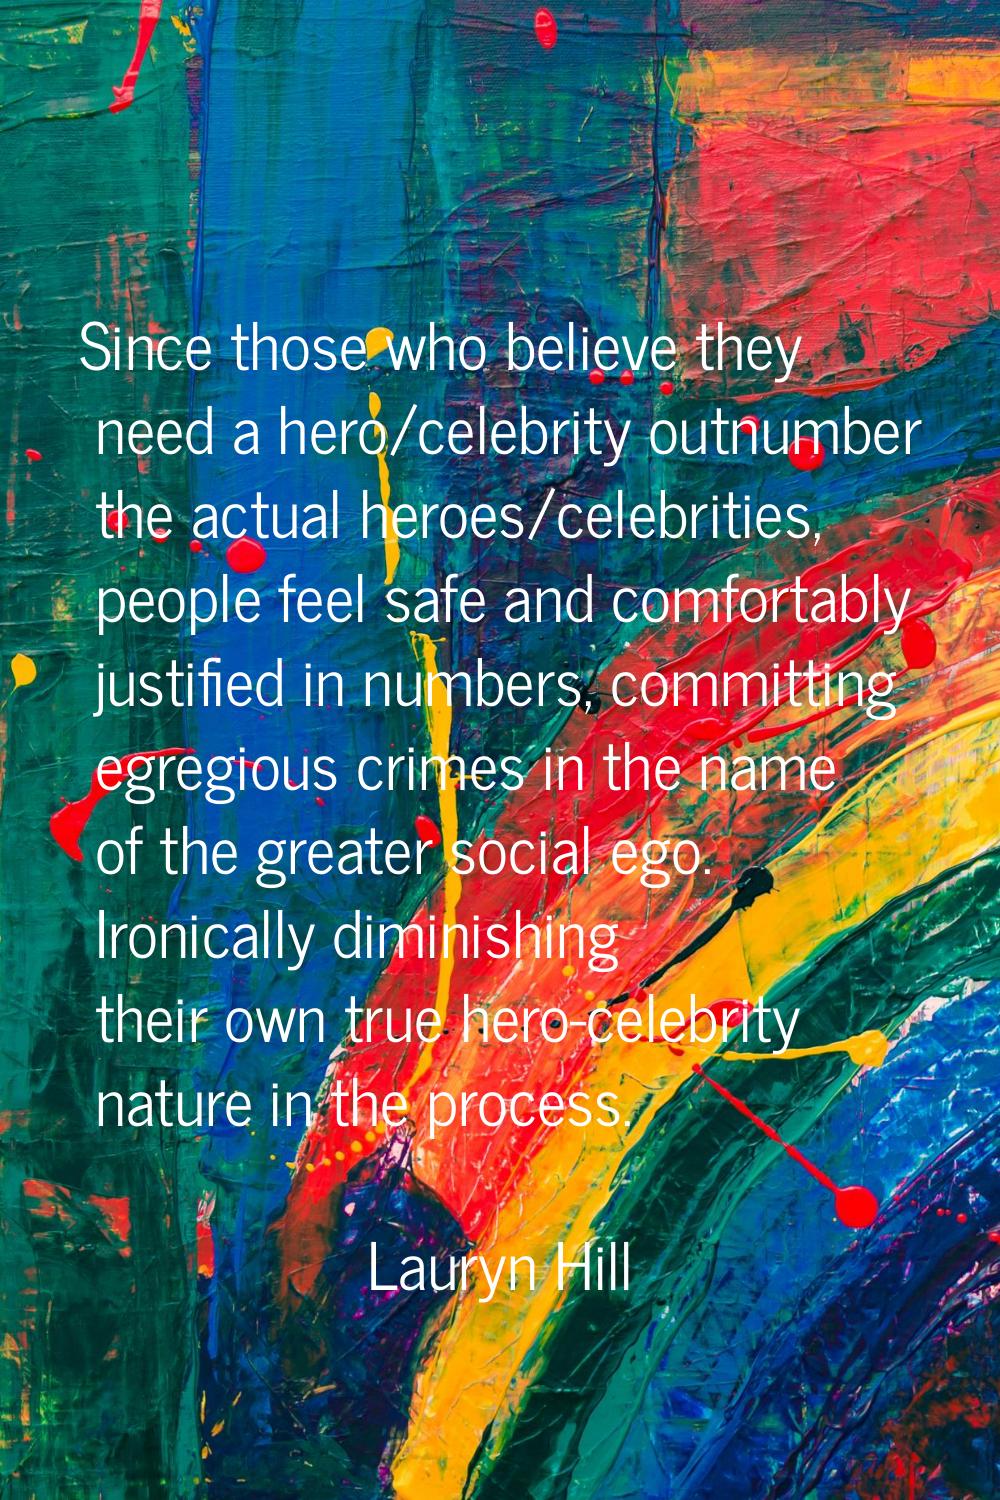 Since those who believe they need a hero/celebrity outnumber the actual heroes/celebrities, people 